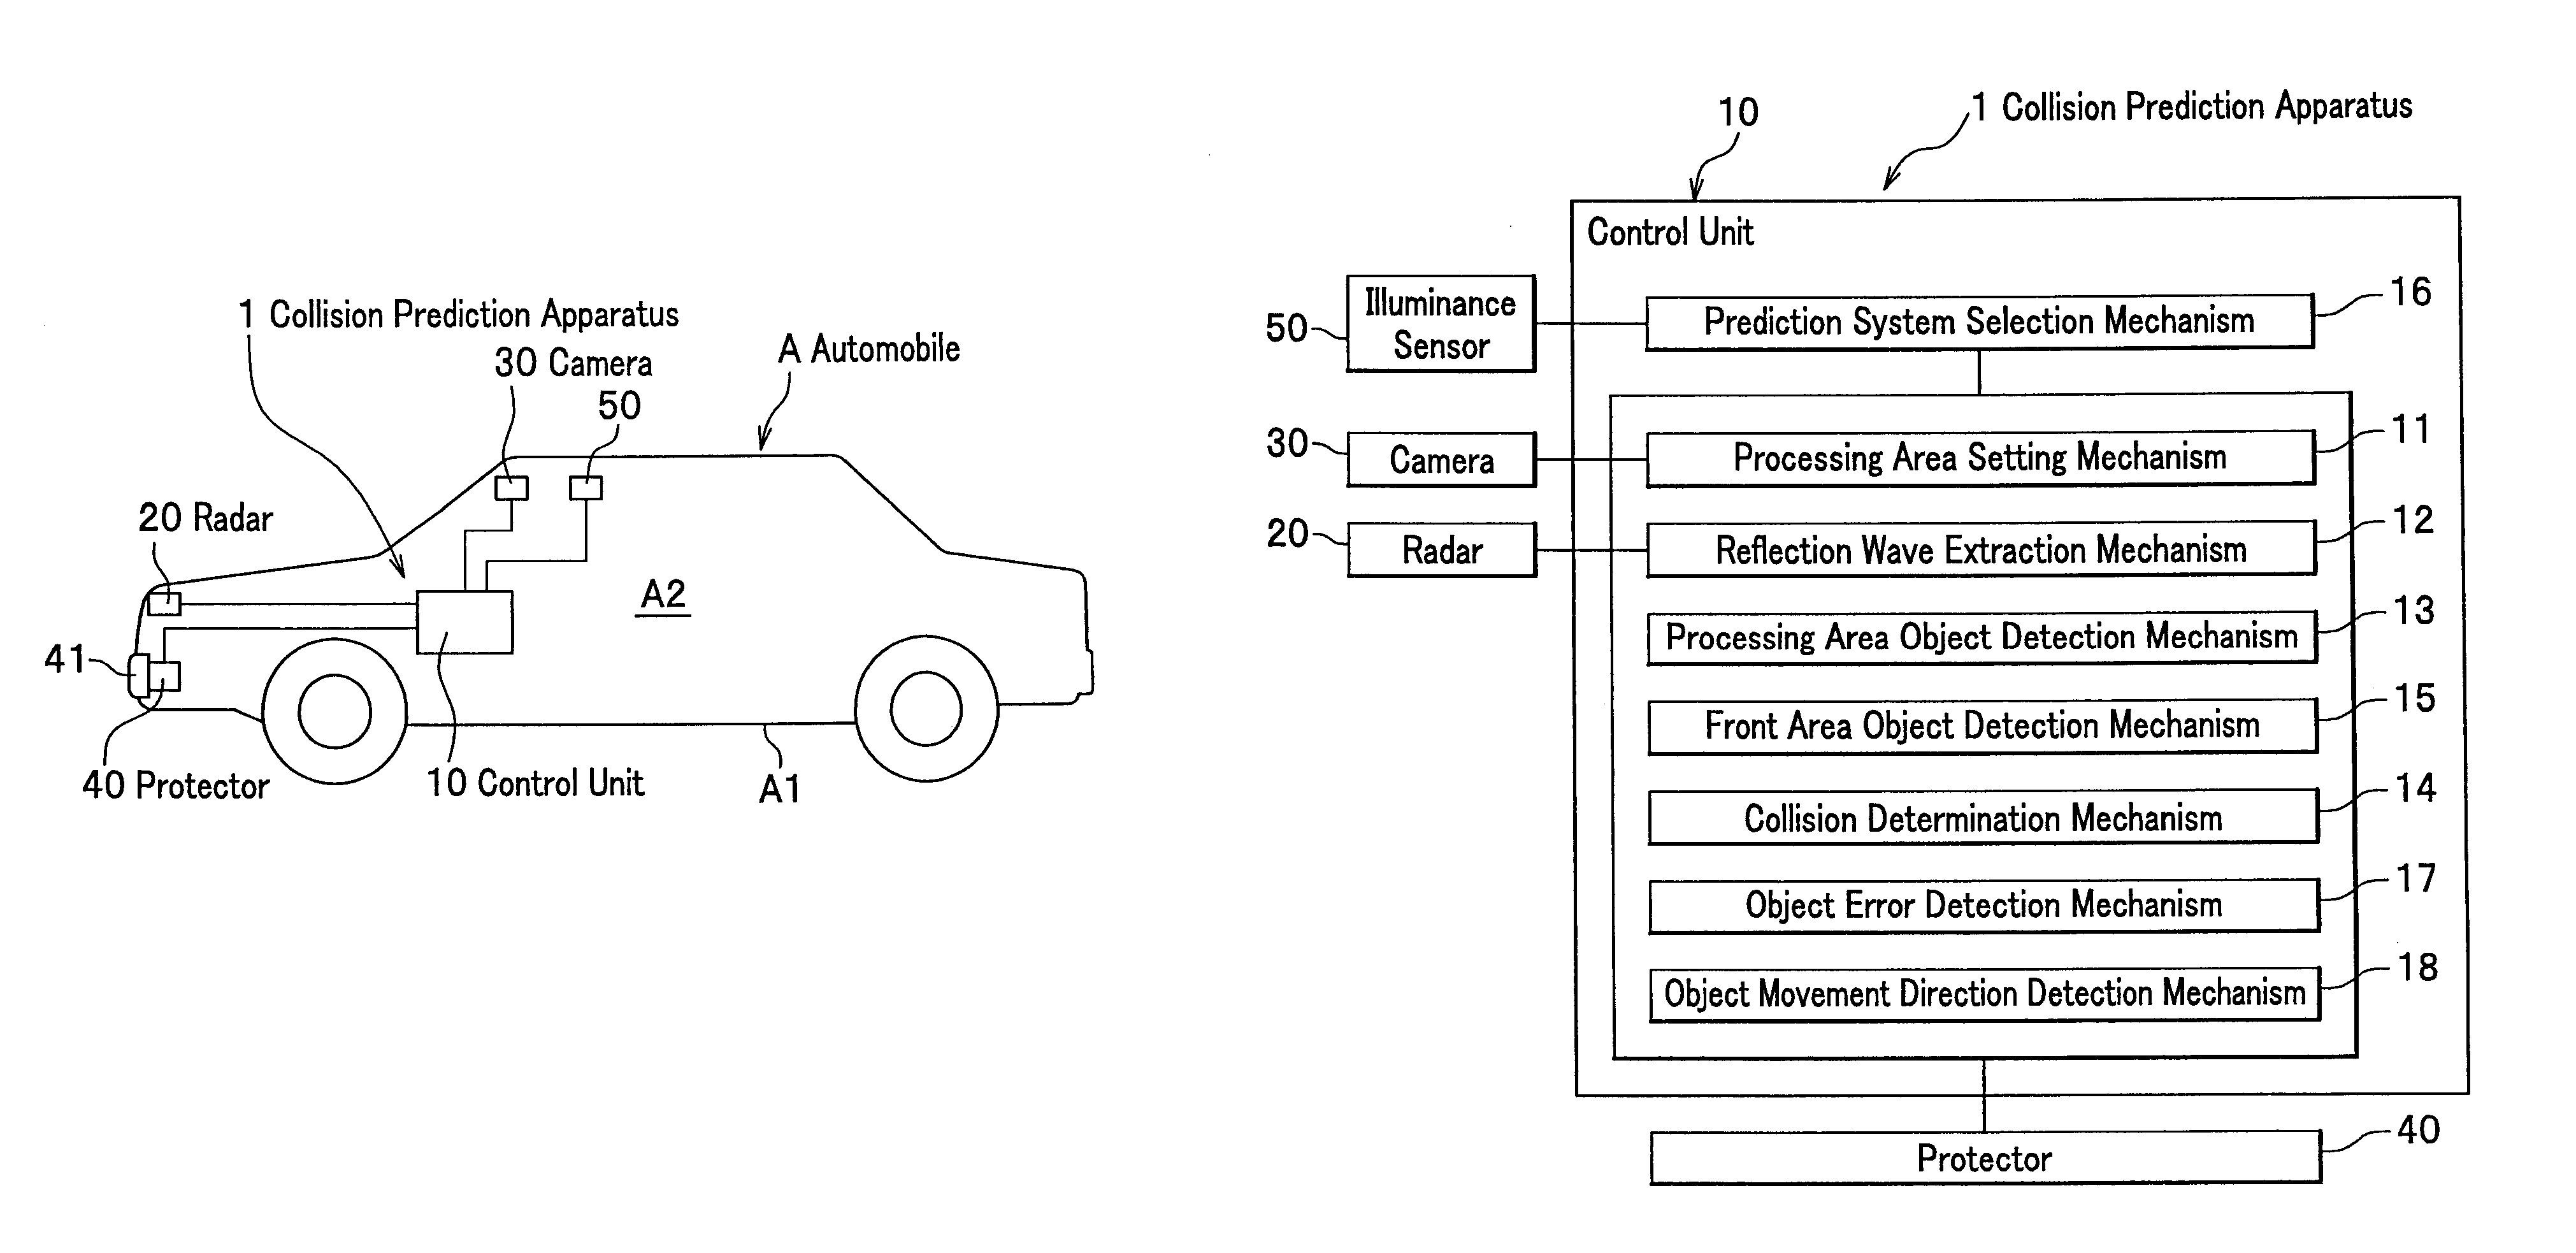 Apparatus and method for predicting collision